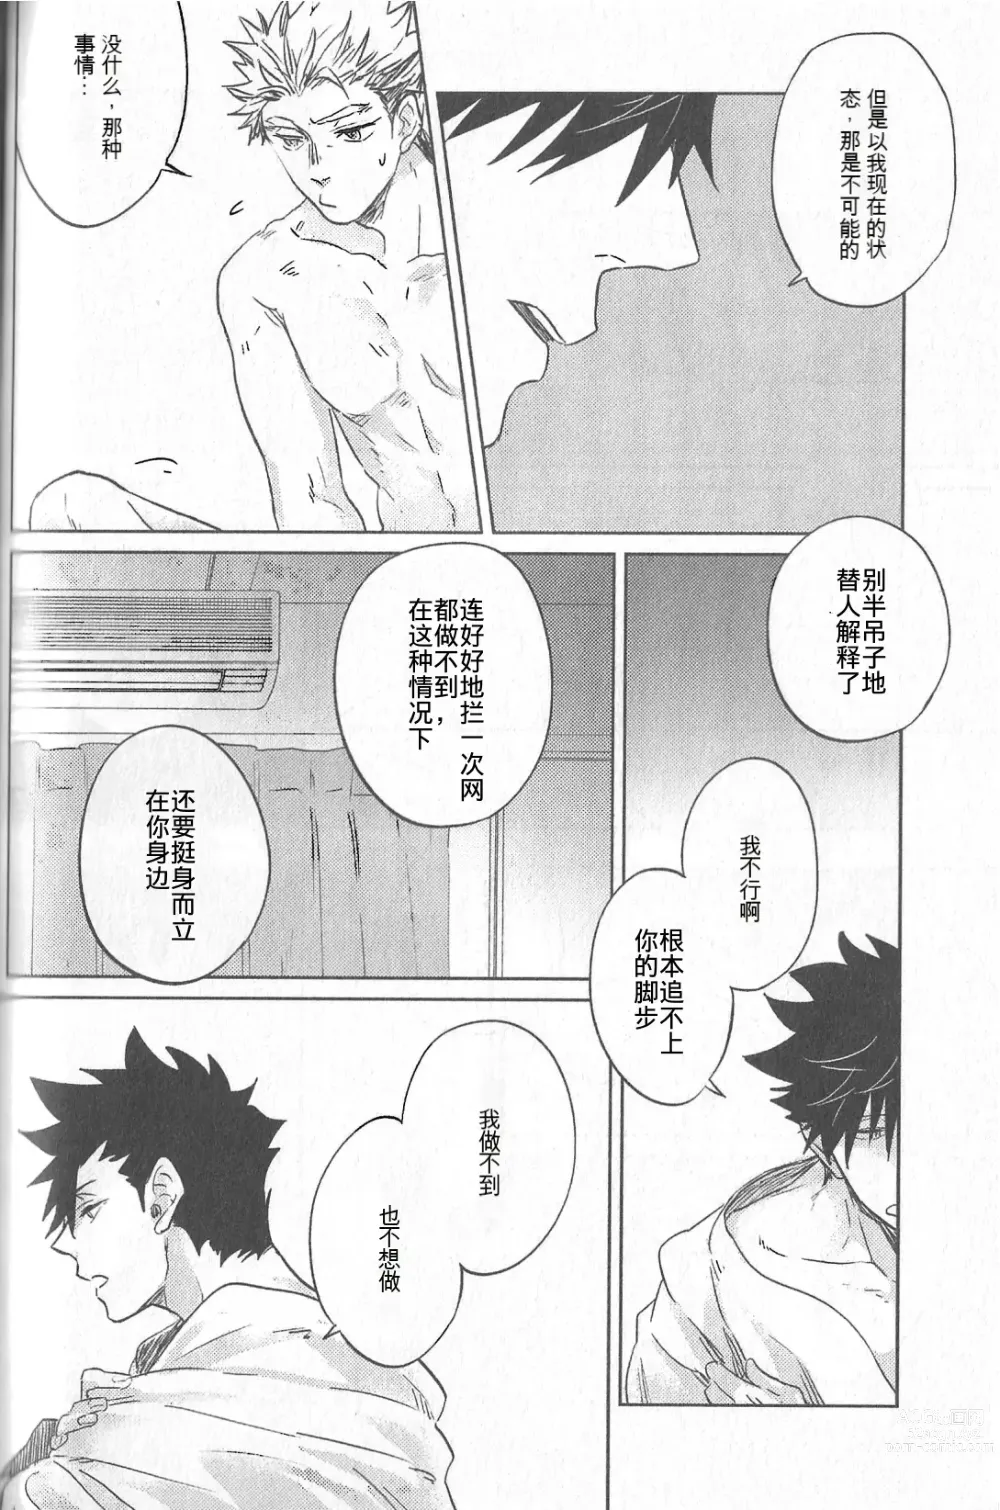 Page 15 of doujinshi 极境的野兽 后篇